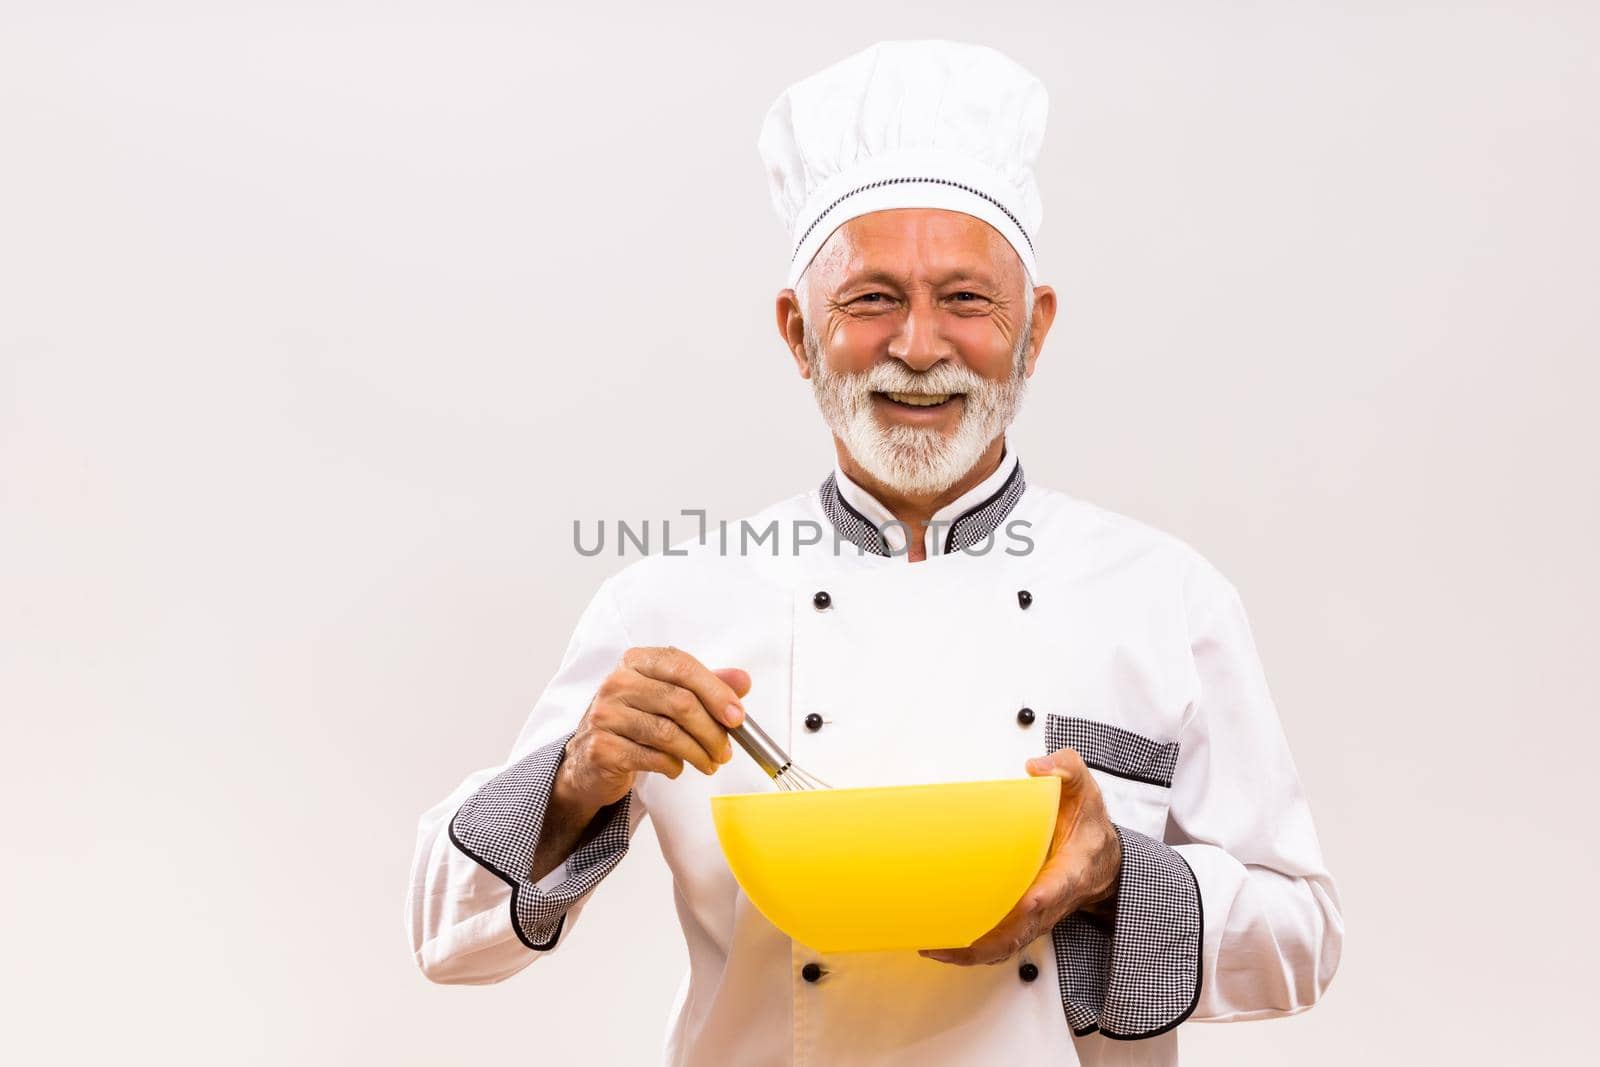 Senior chef holding bowl and wire whisk on gray background.